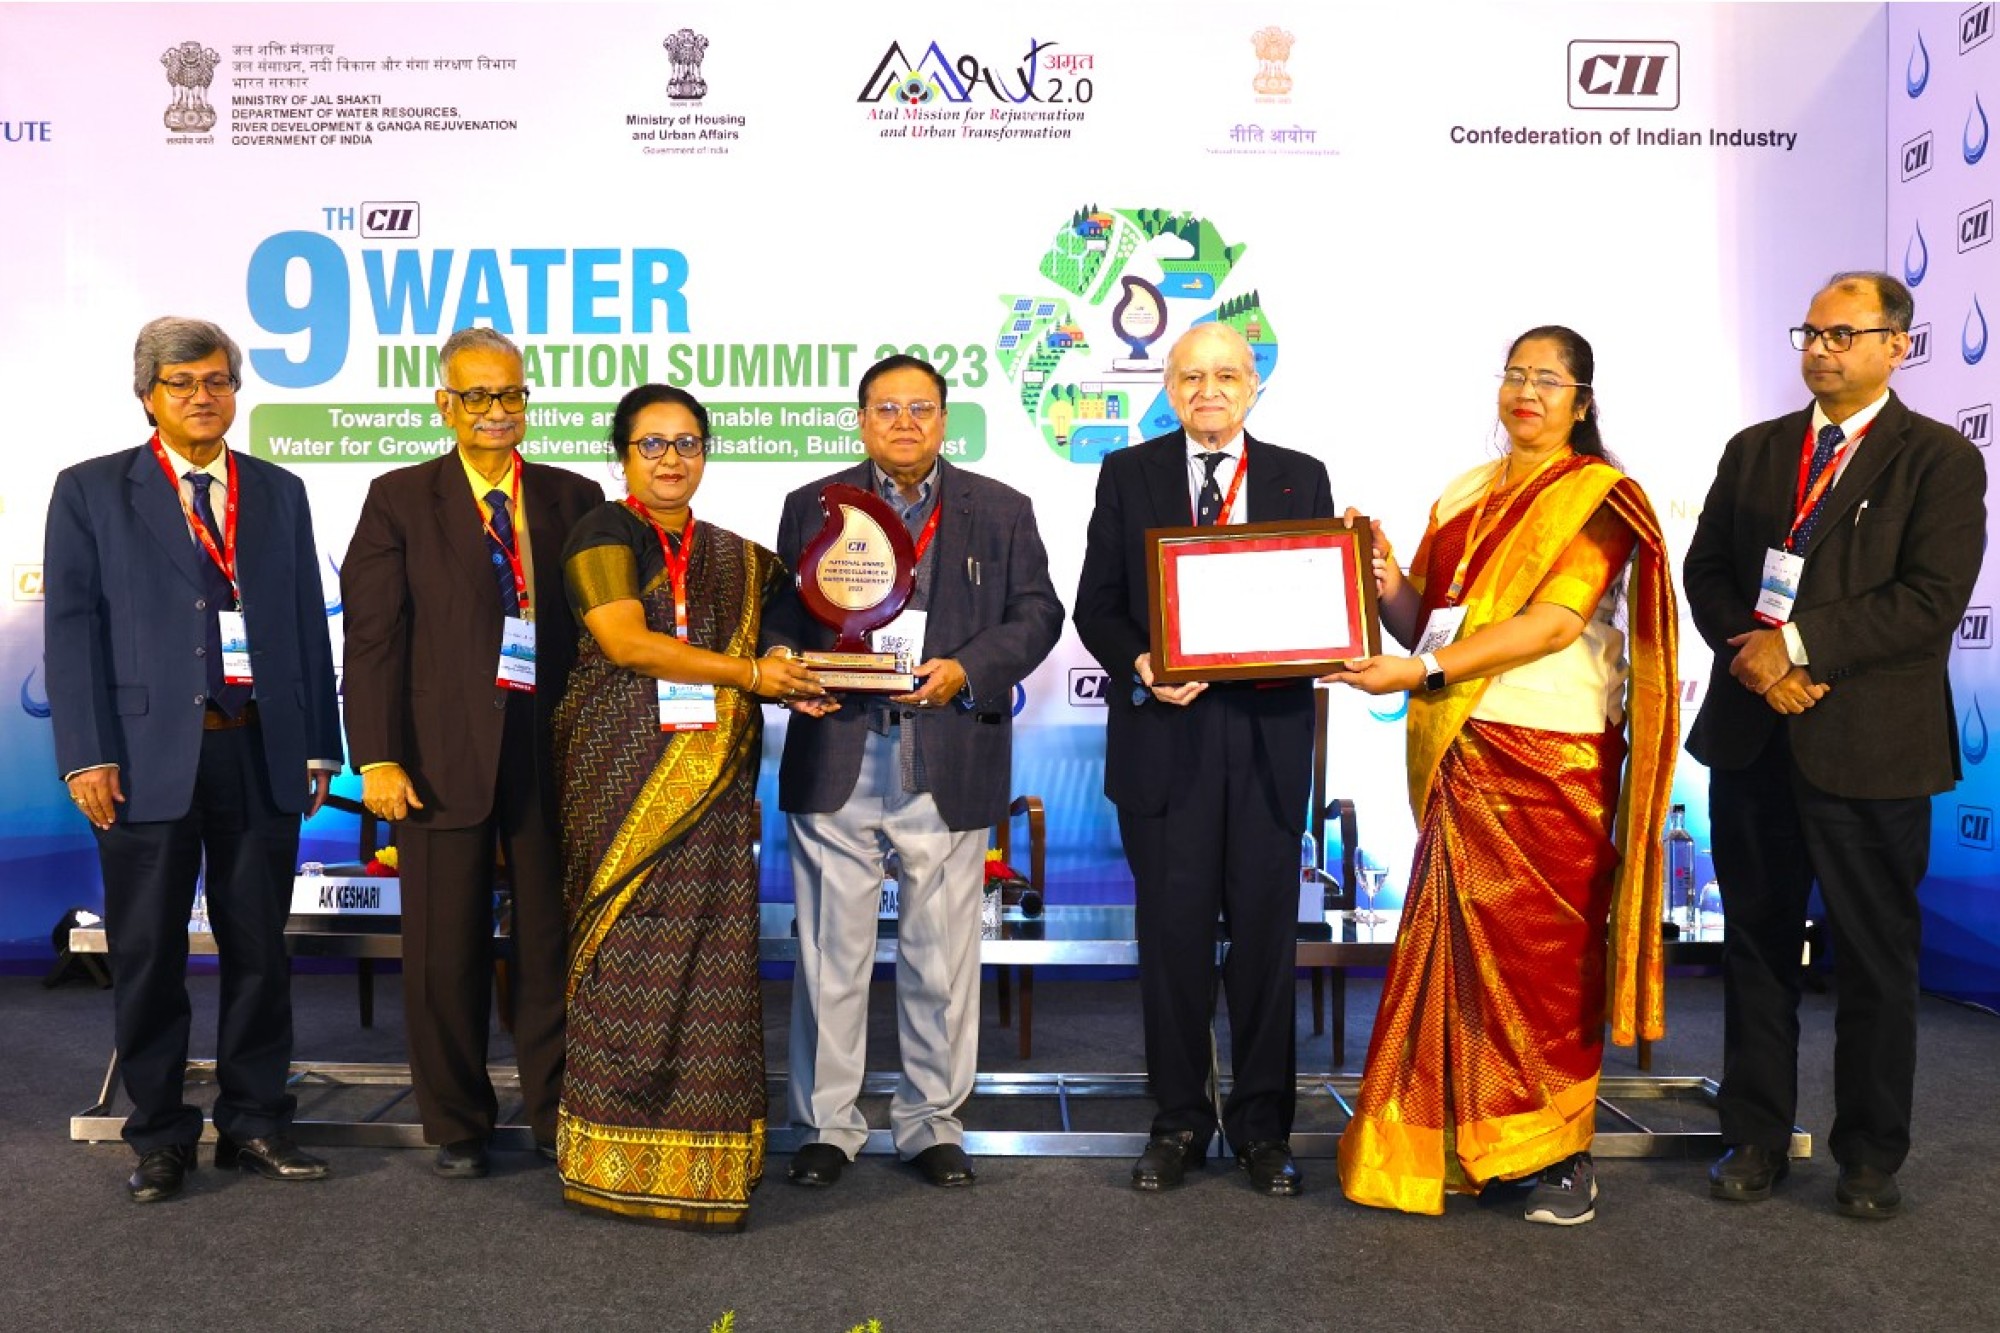 L&T wins CII Award for water management